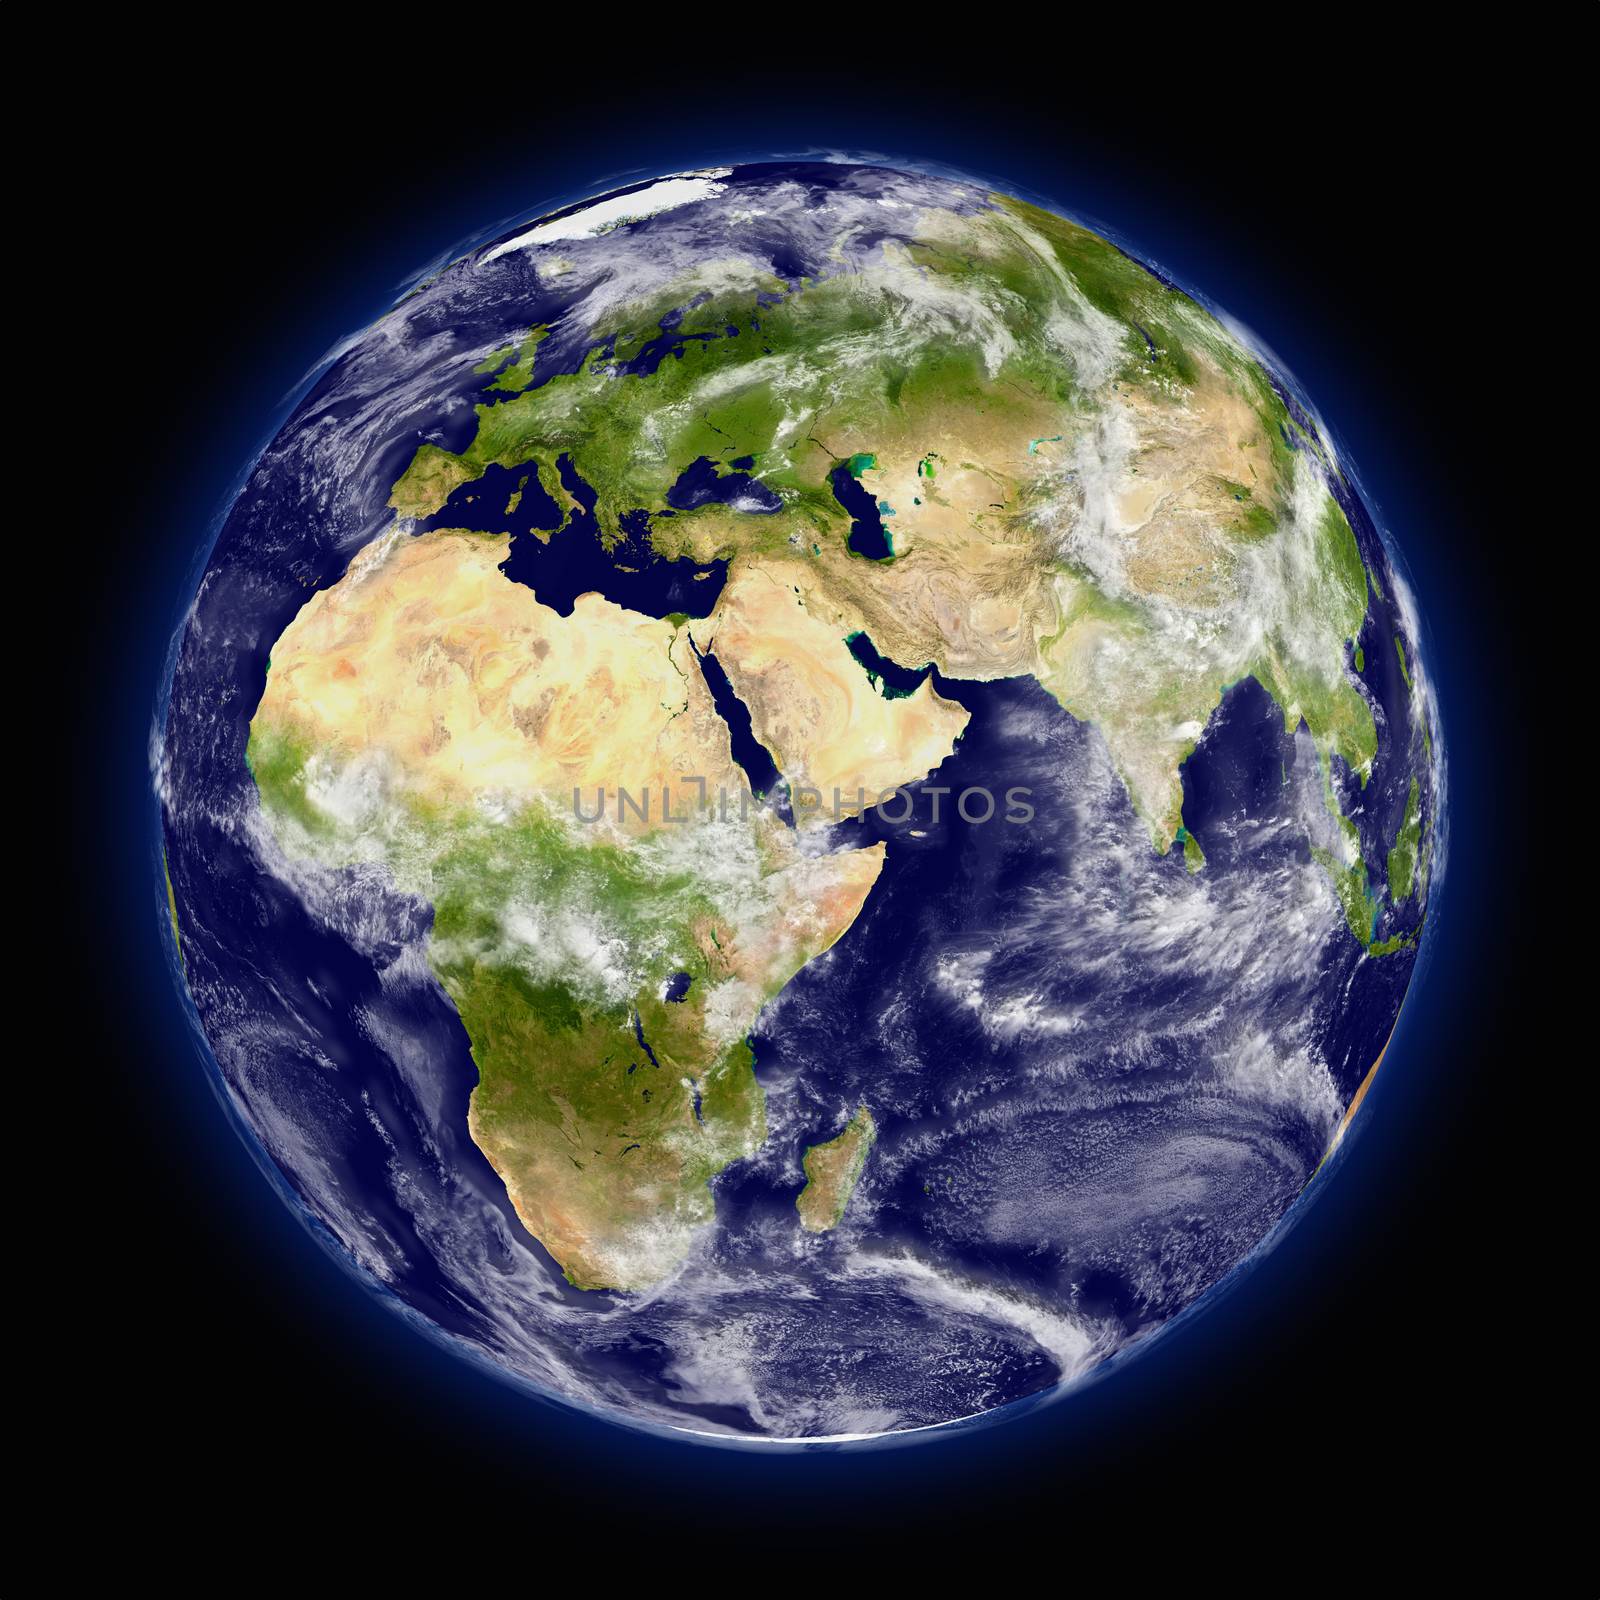 Realistic illustration of planet Earth as seen from space facing Africa, Europe and middle east region